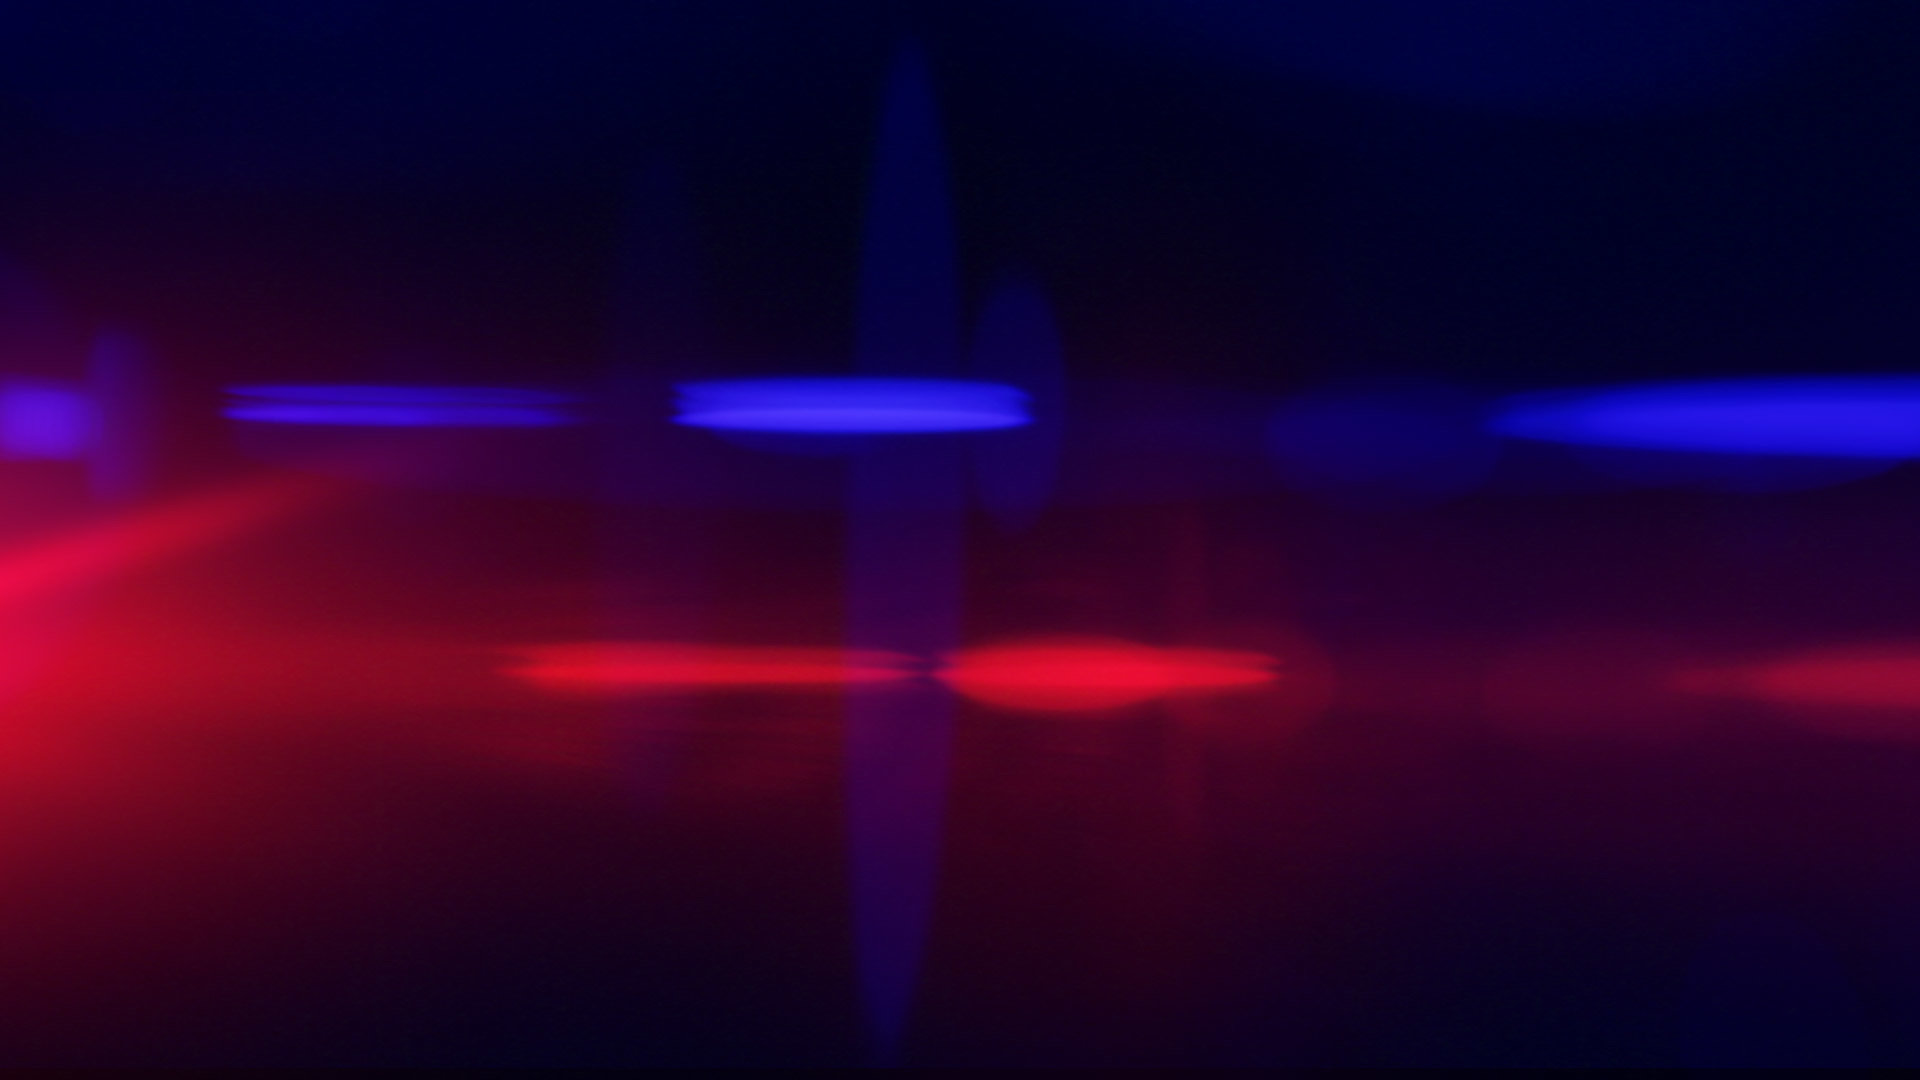 Pursuit: Police Light Lens Flares Stock Footage Collection | ActionVFX